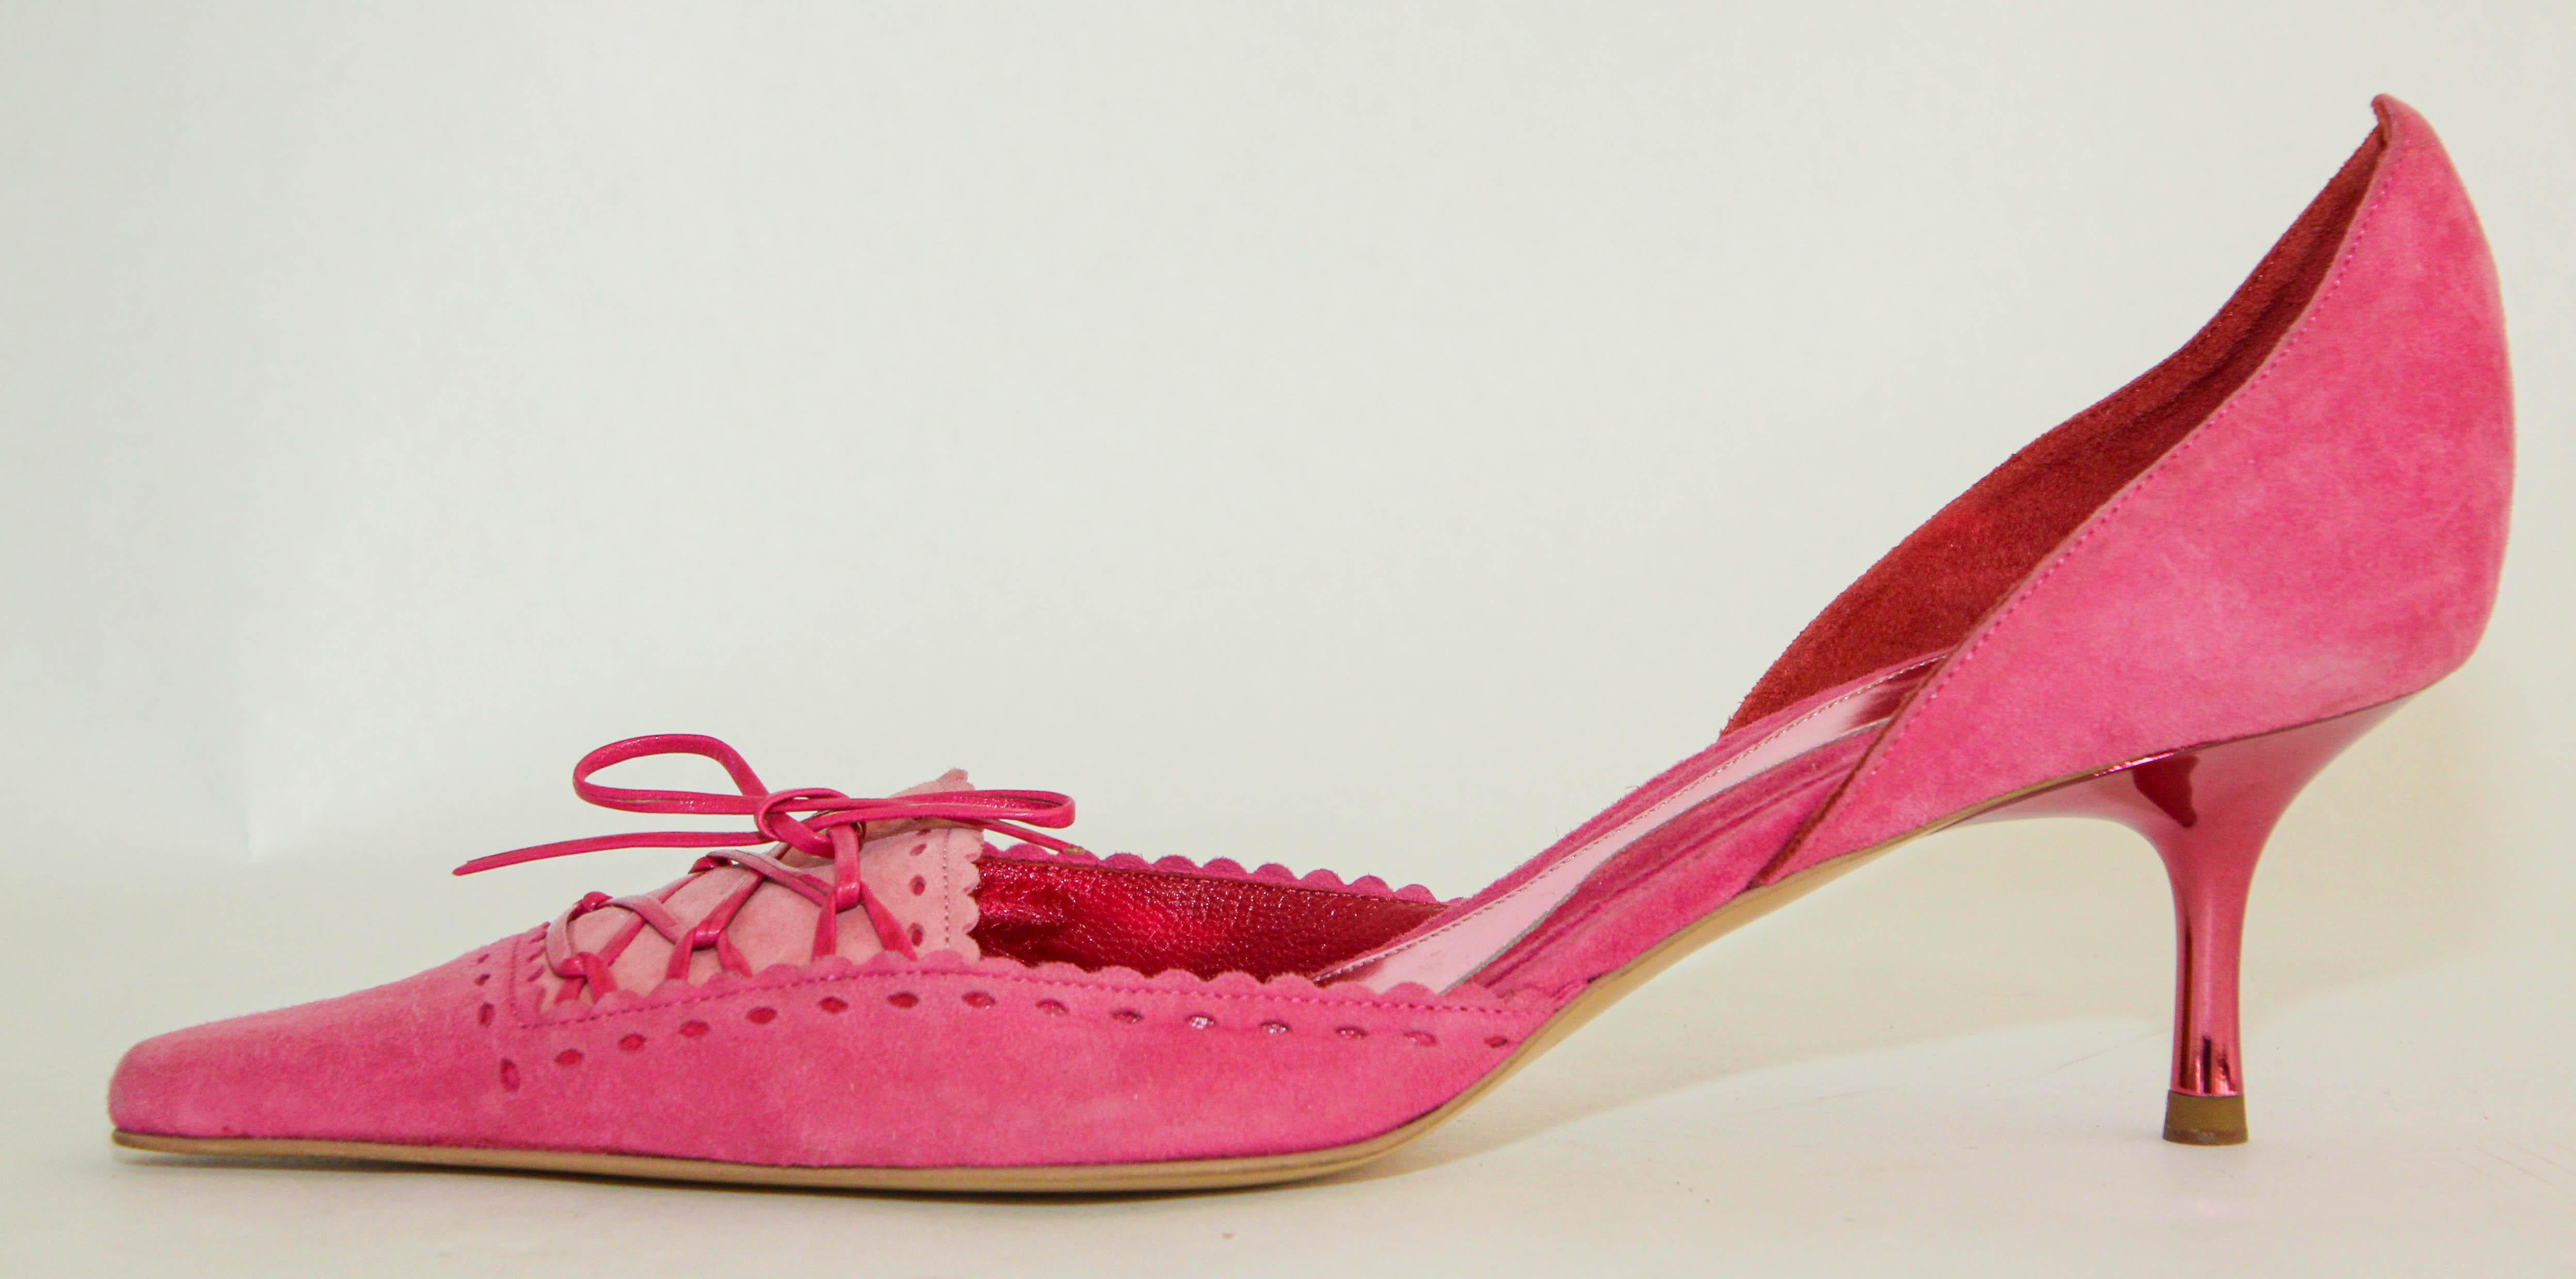 Women's Escada Hot Pink Suede Pumps with Leather Details Size 36.5 Italy